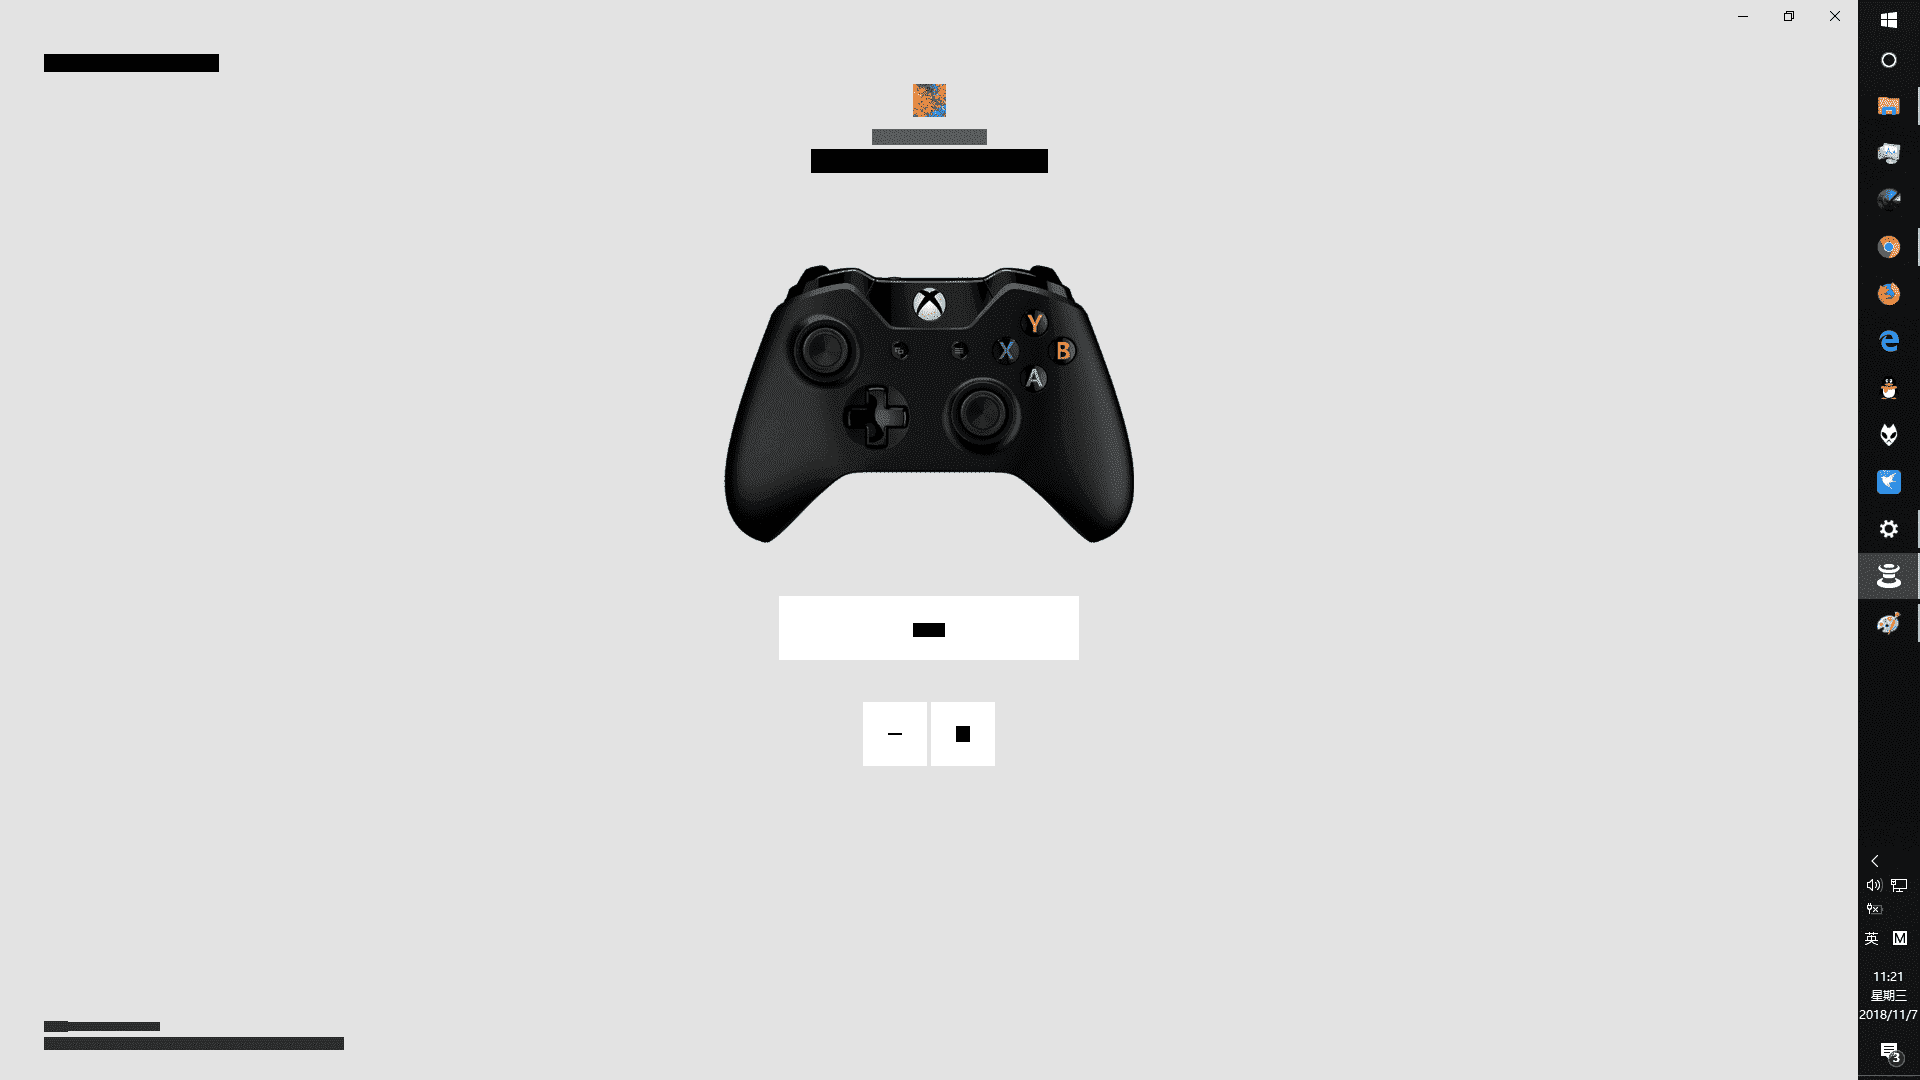 Xbox accessories app doesn't show text.